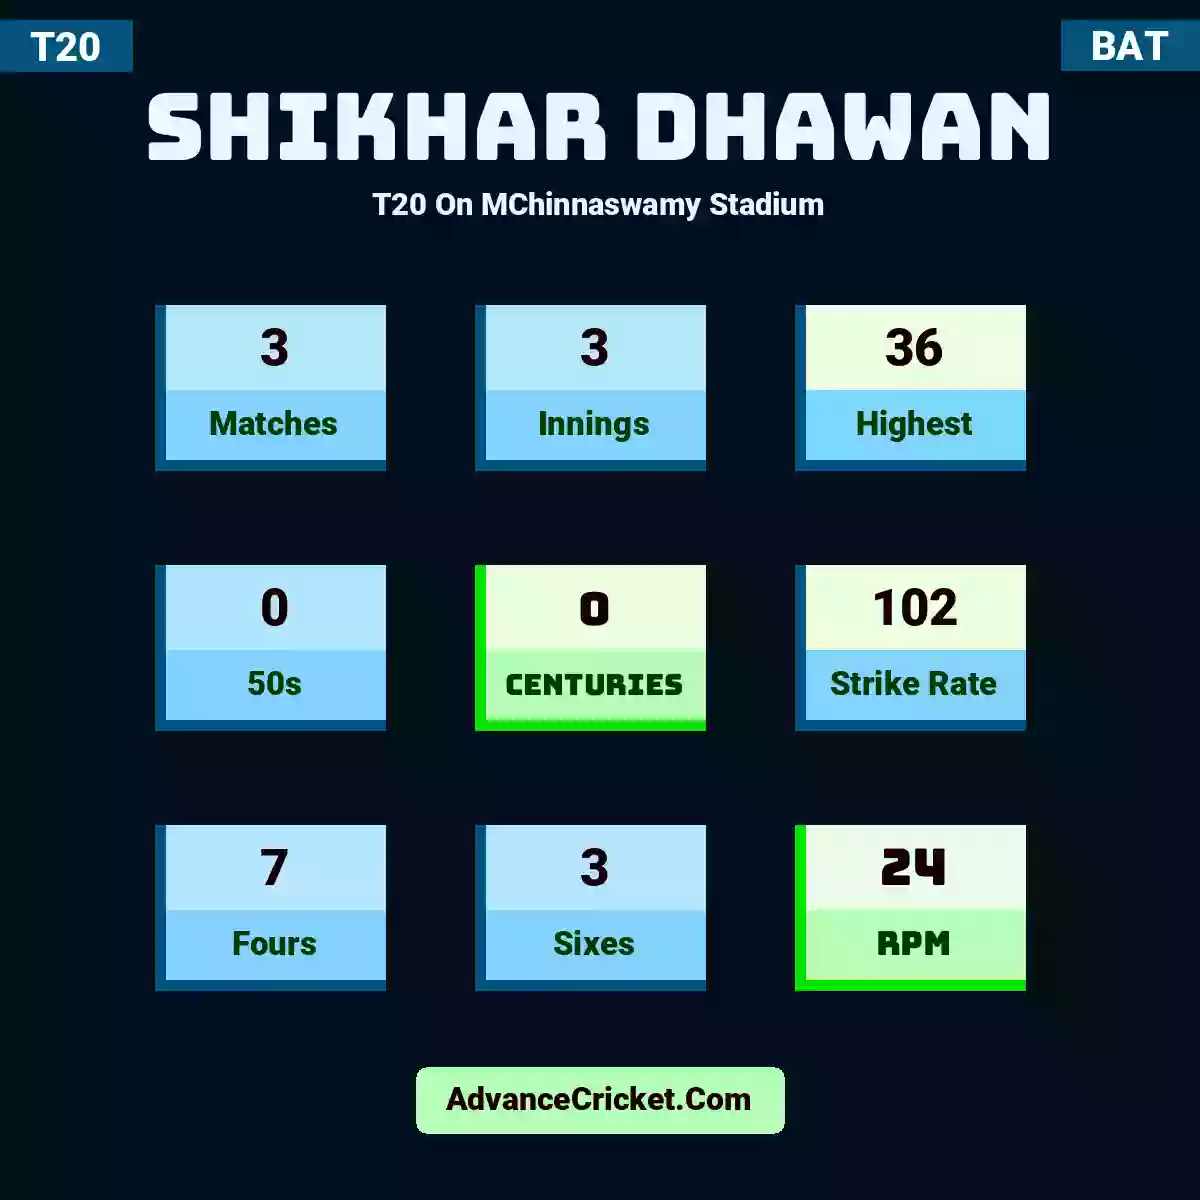 Shikhar Dhawan T20  On MChinnaswamy Stadium, Shikhar Dhawan played 3 matches, scored 36 runs as highest, 0 half-centuries, and 0 centuries, with a strike rate of 102. S.Dhawan hit 7 fours and 3 sixes, with an RPM of 24.